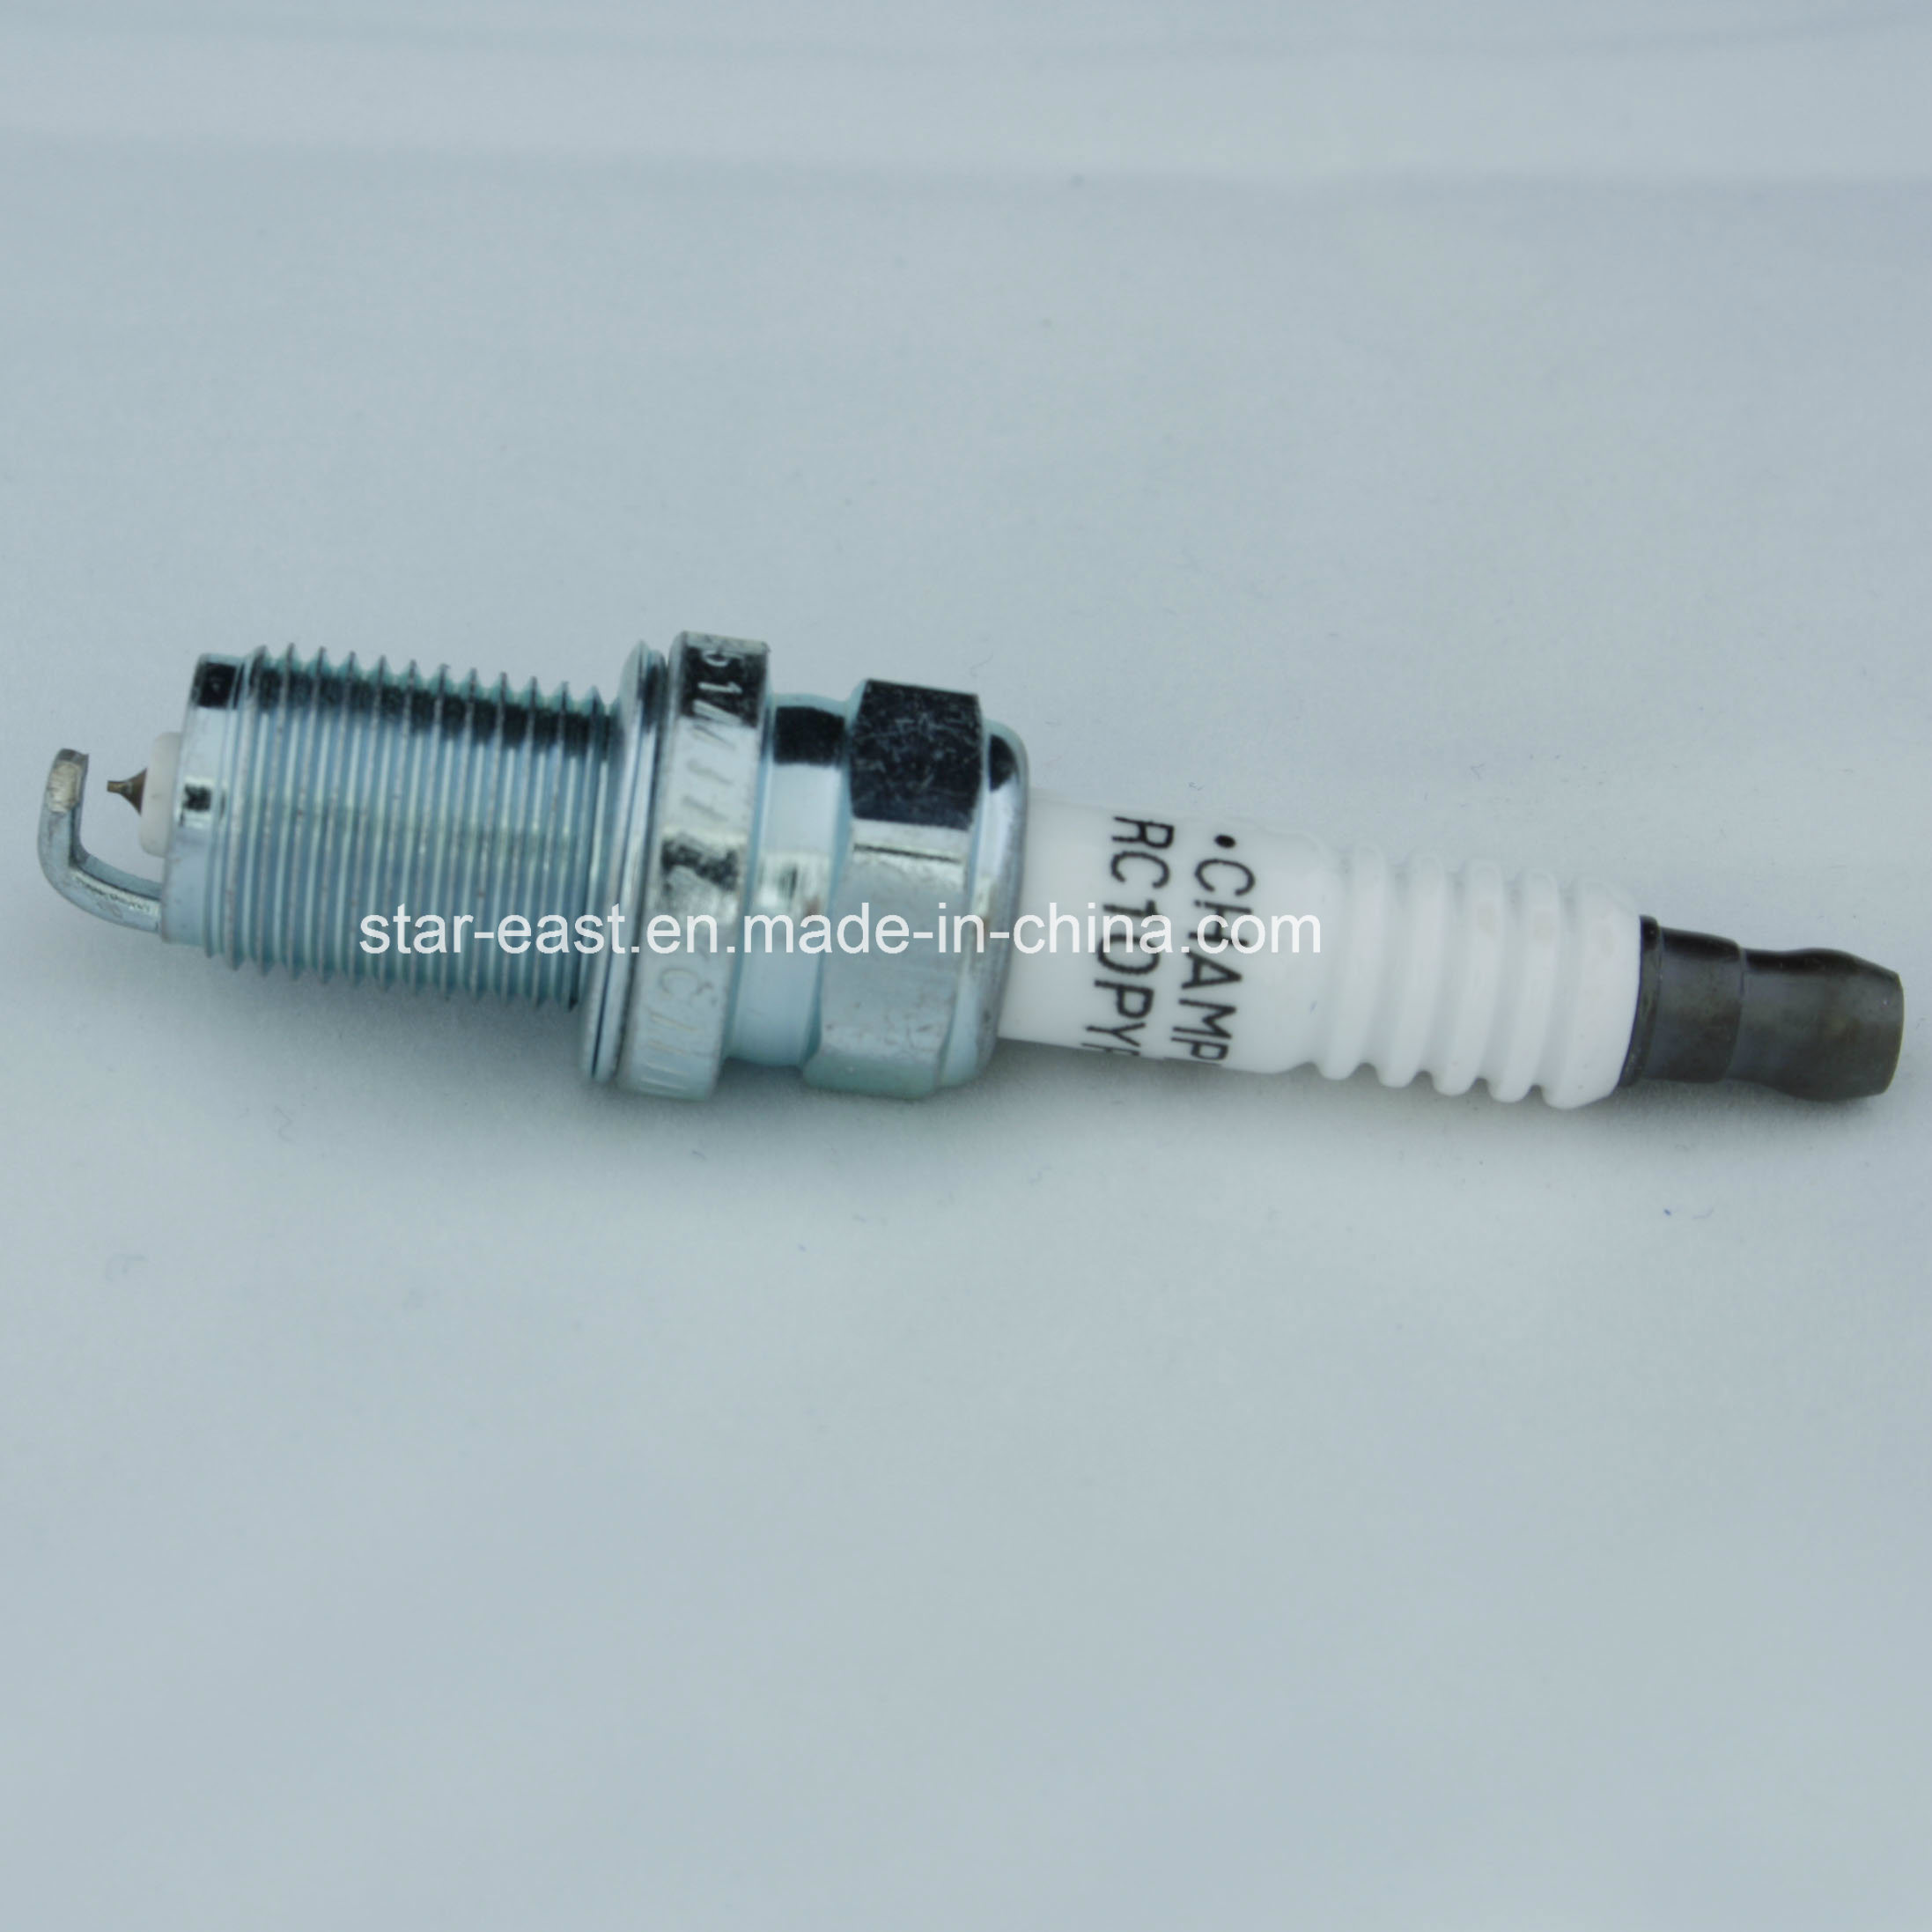 Chamoion Spark Plug for RC10pypy4